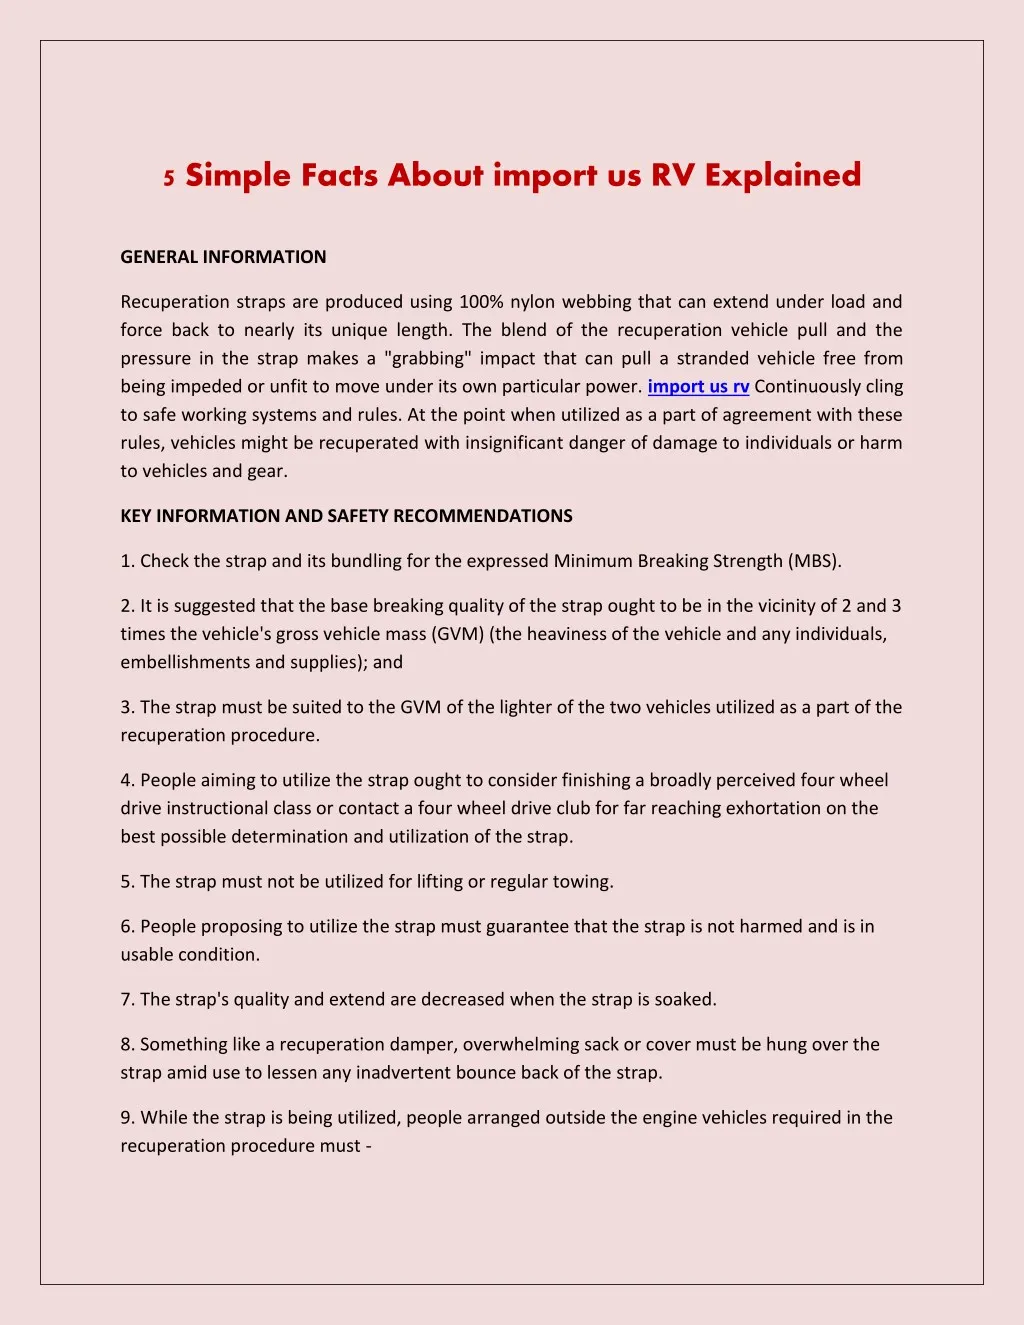 5 simple facts about import us rv explained